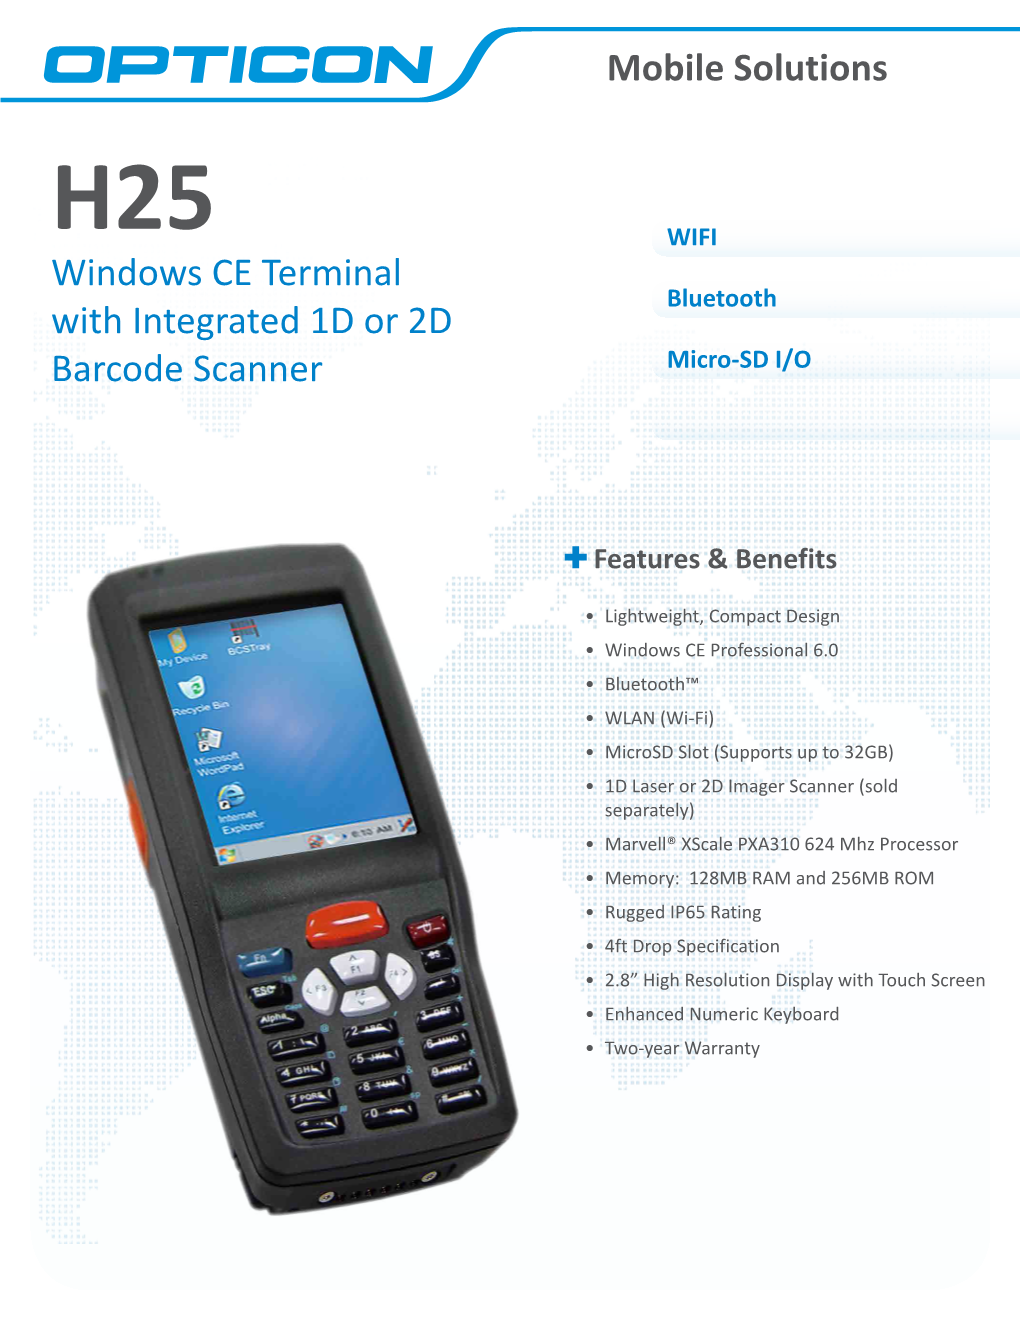 Mobile Solutions Windows CE Terminal with Integrated 1D Or 2D